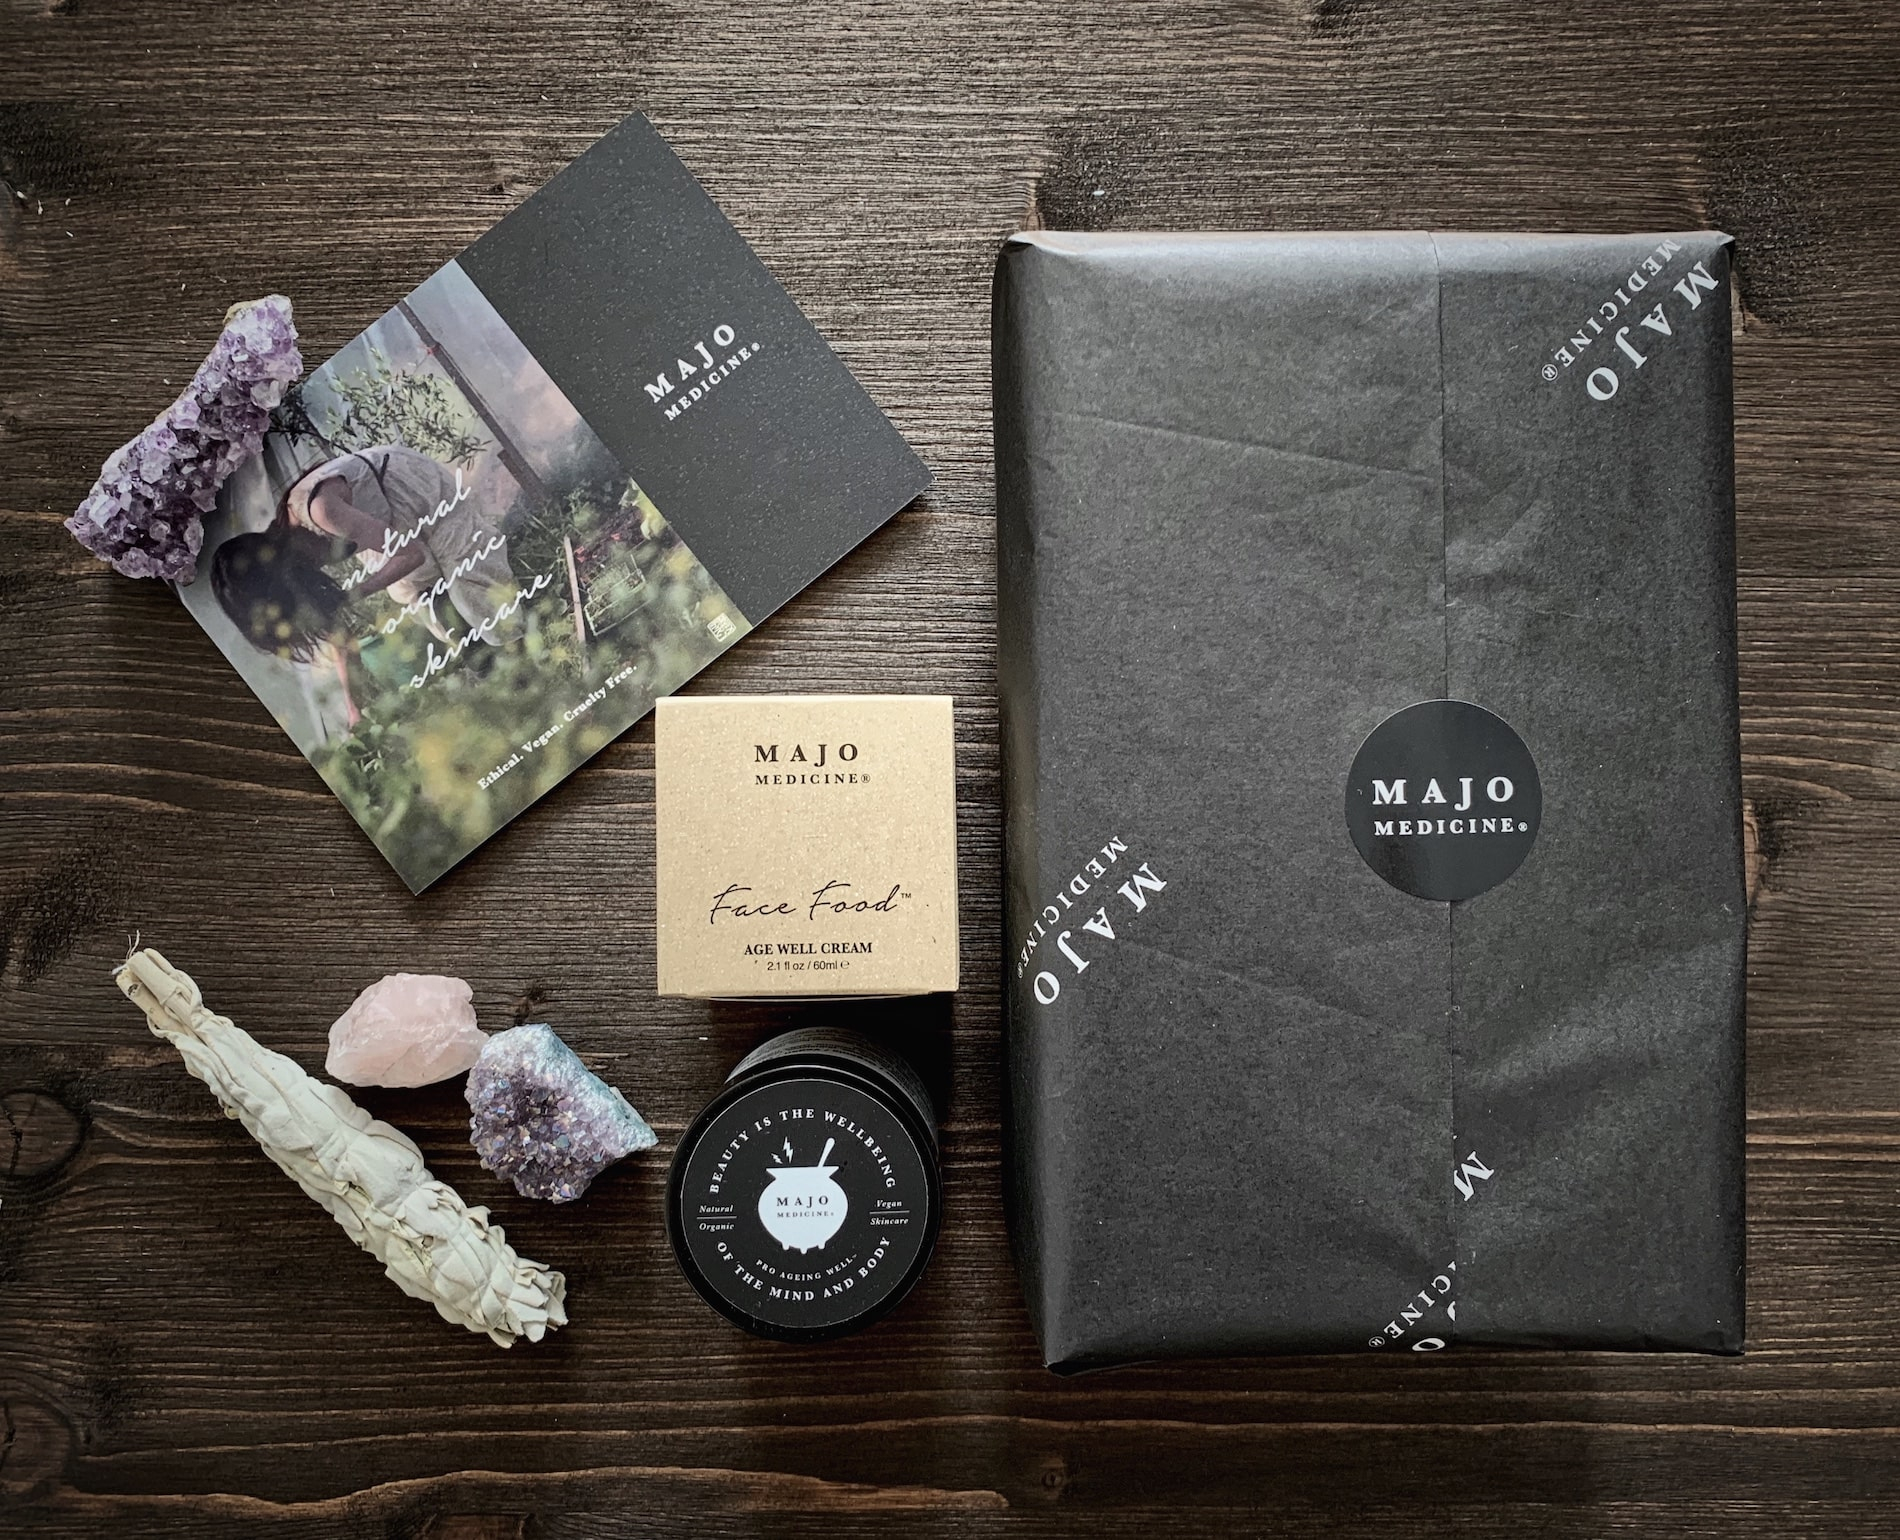 Majo Medicine products wrapped in branded tissue paper